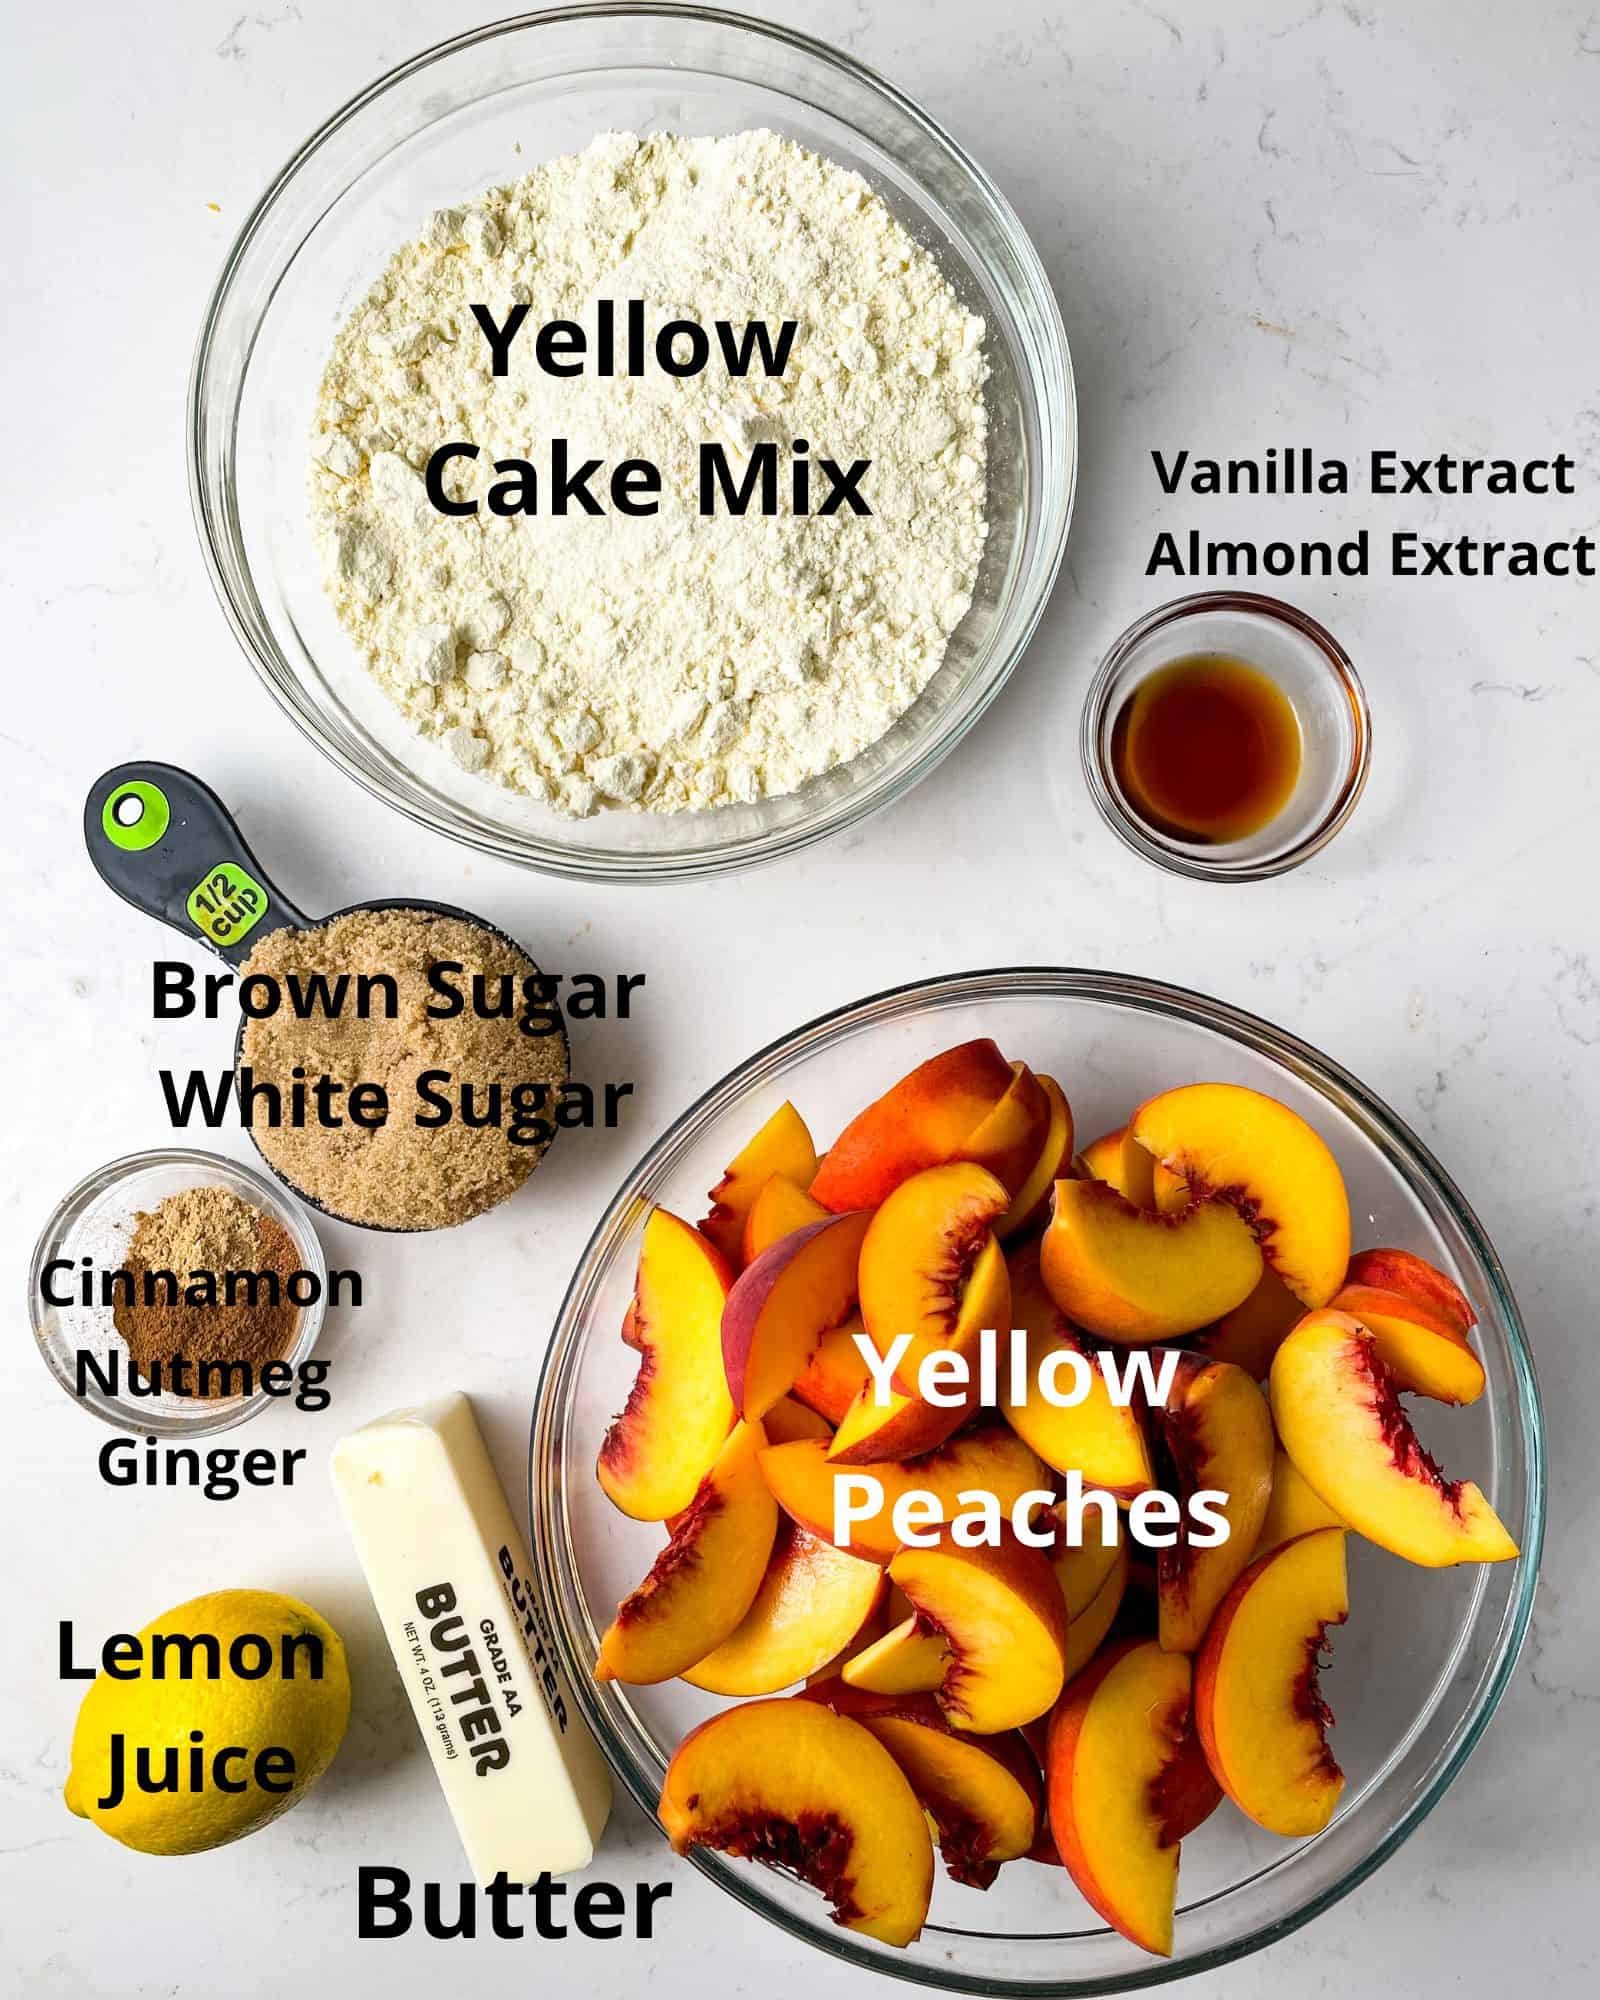 ingredients to make peach cobbler with cake mix - yellow cake mix, yellow peaches, brown sugar, white sugar, vanilla extract, almond extract, cinnamon, nutmeg, ginger, butter, and lemon juice.